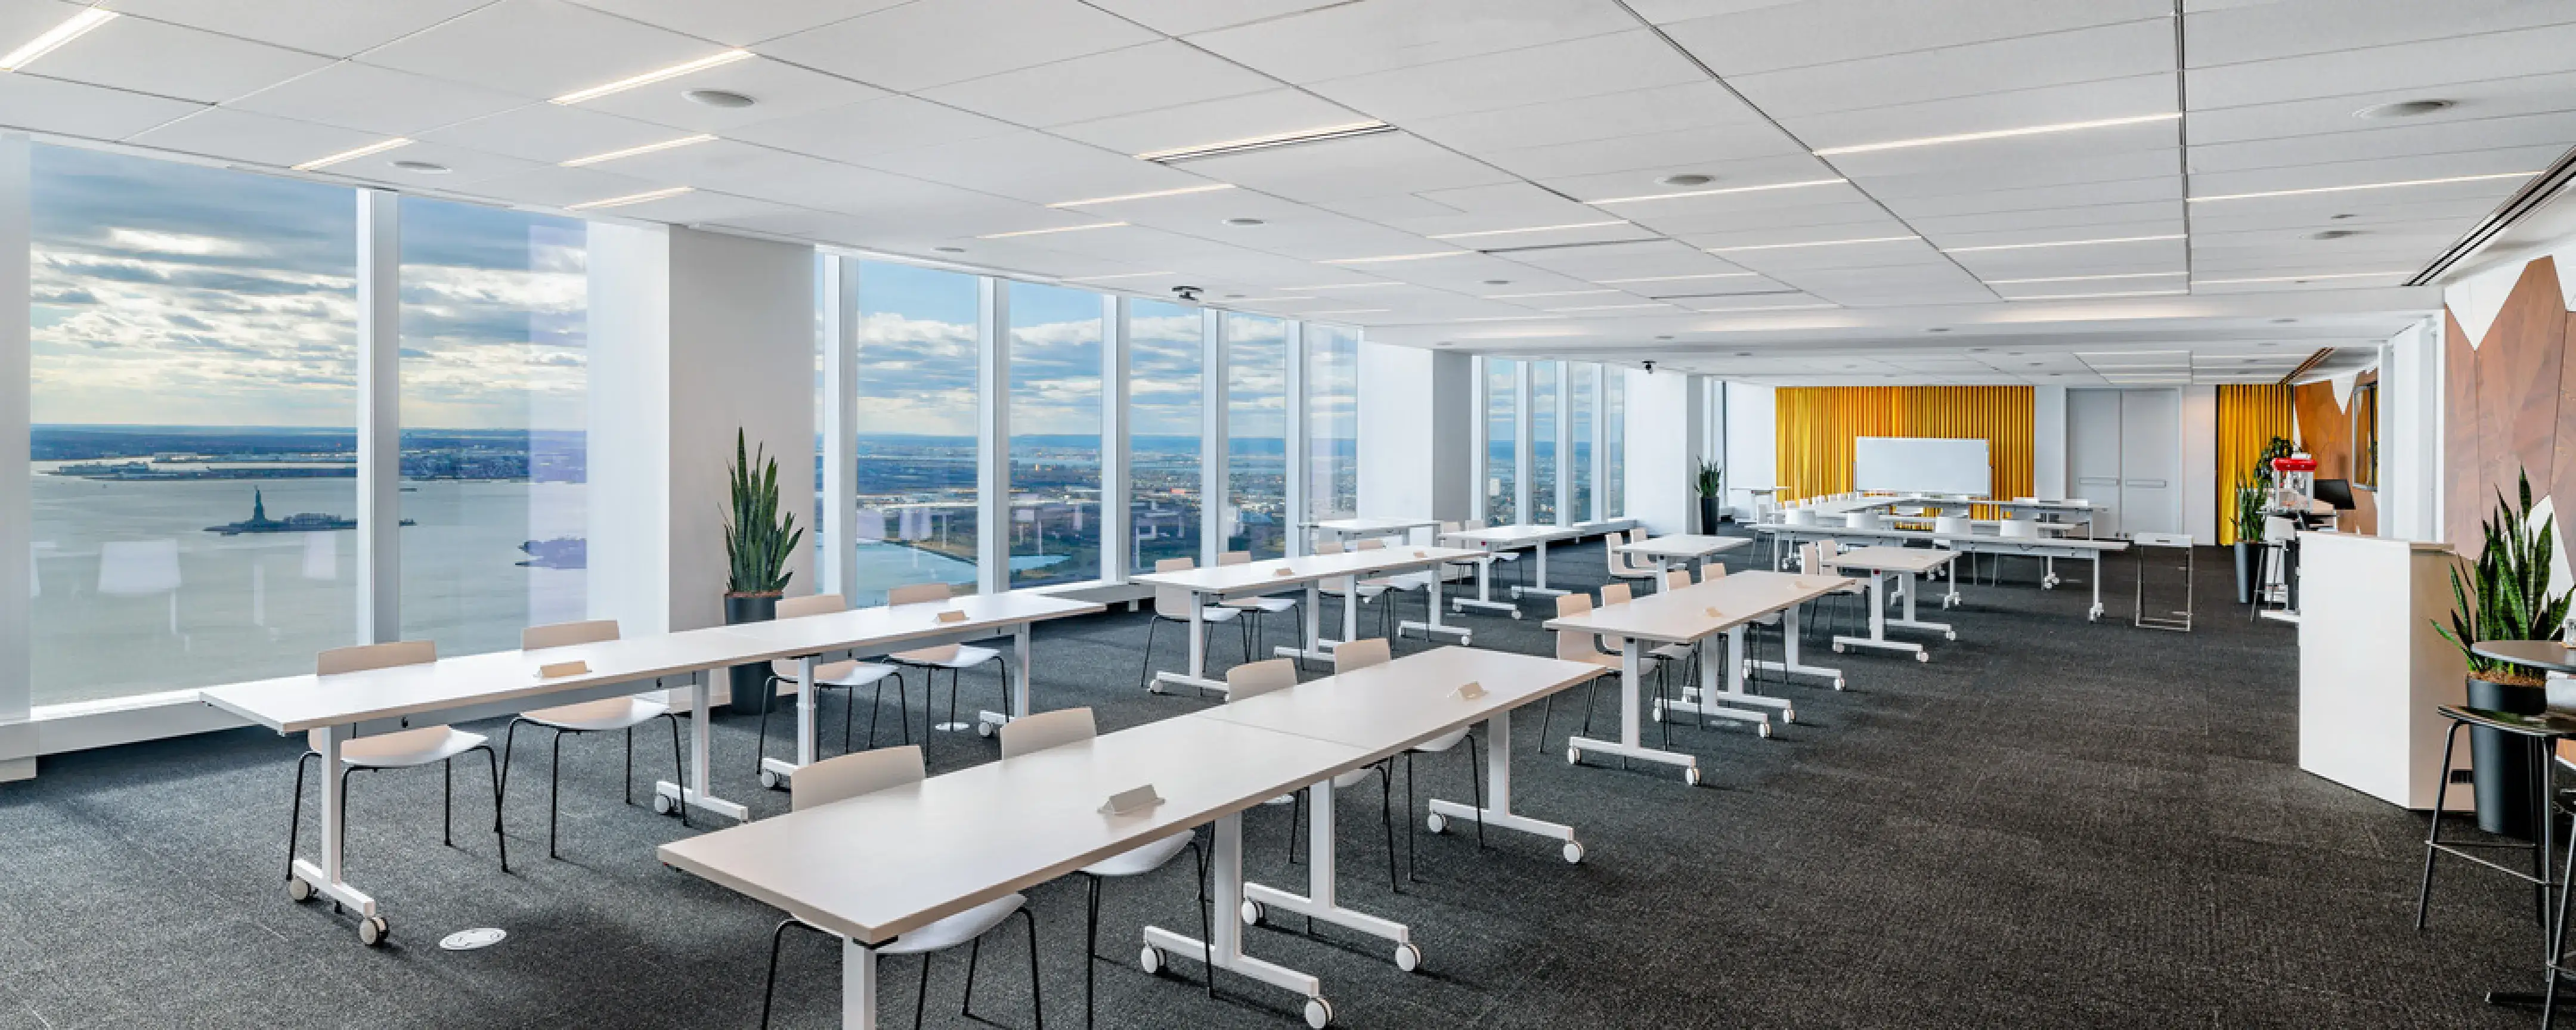 825 Third Avenue Conference Space